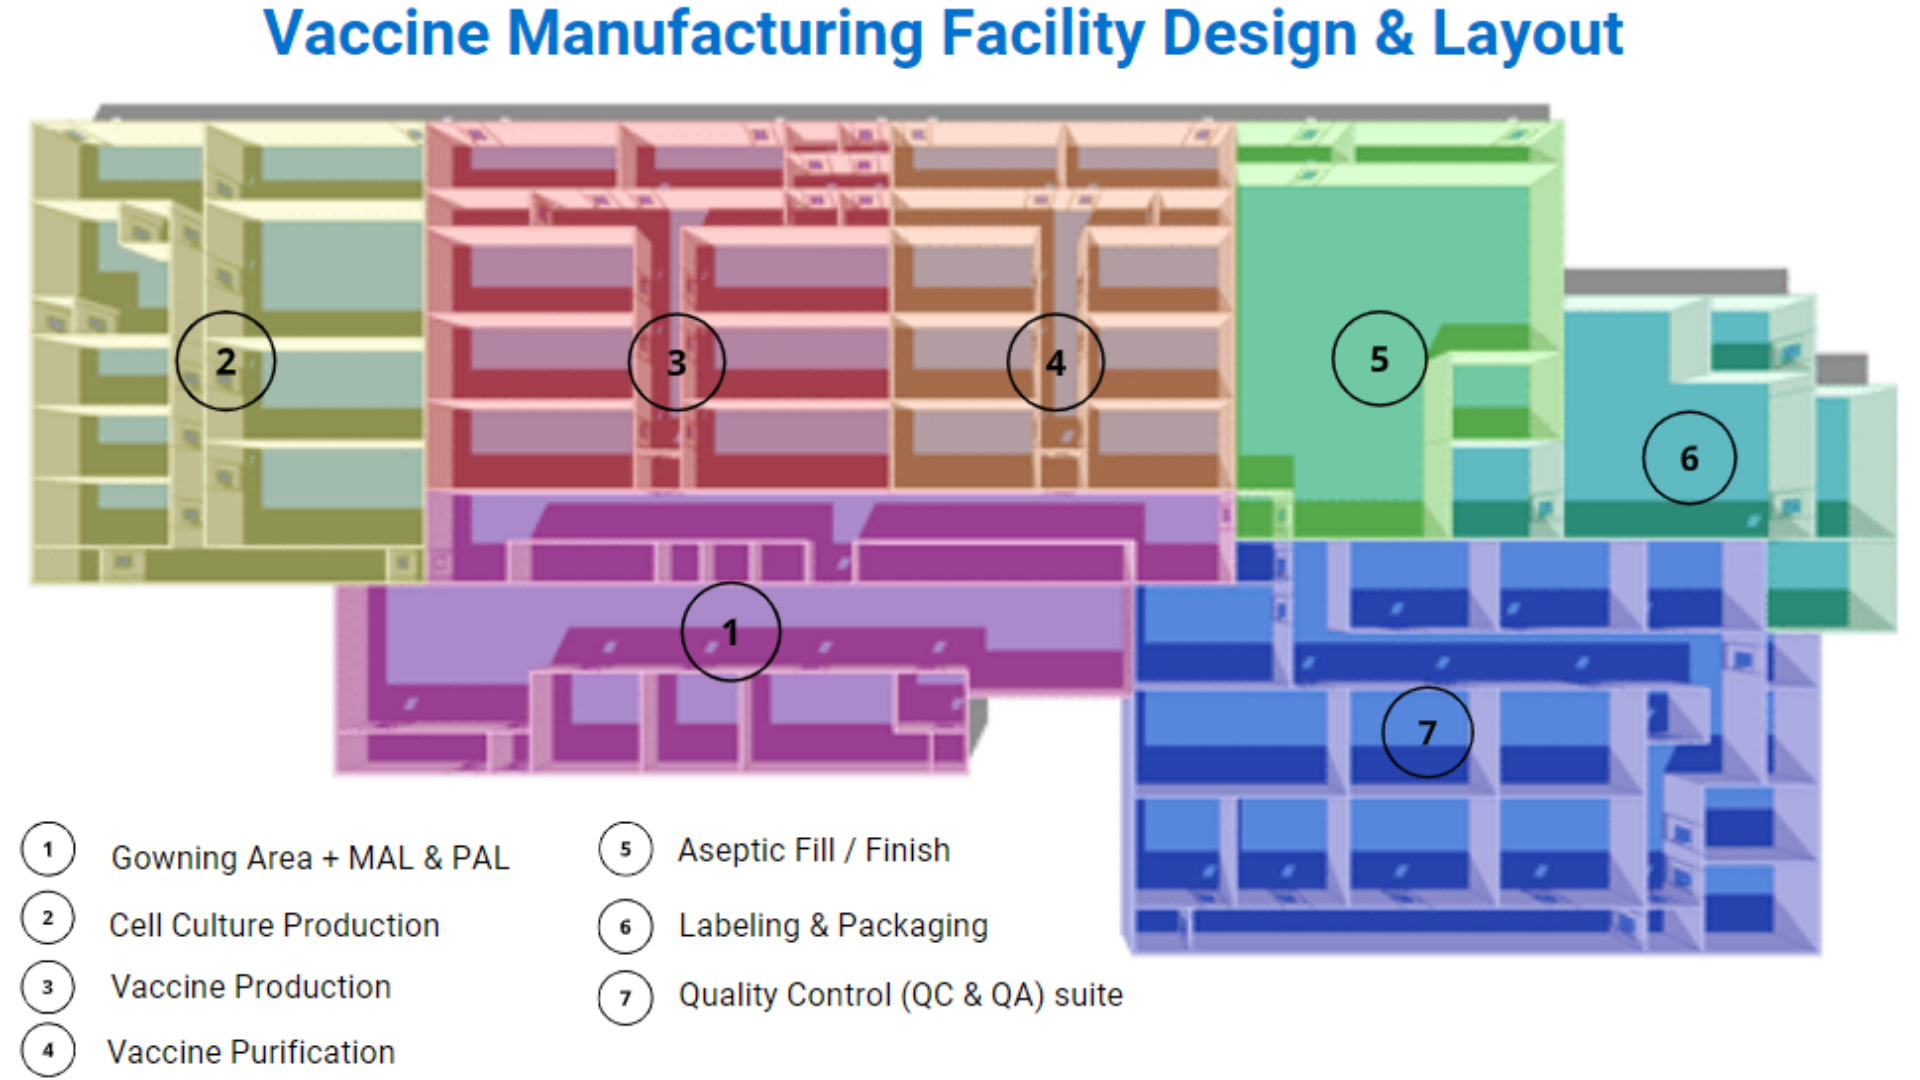 Vaccine Manufacturing Facility Design & Layout | MECART Cleanrooms